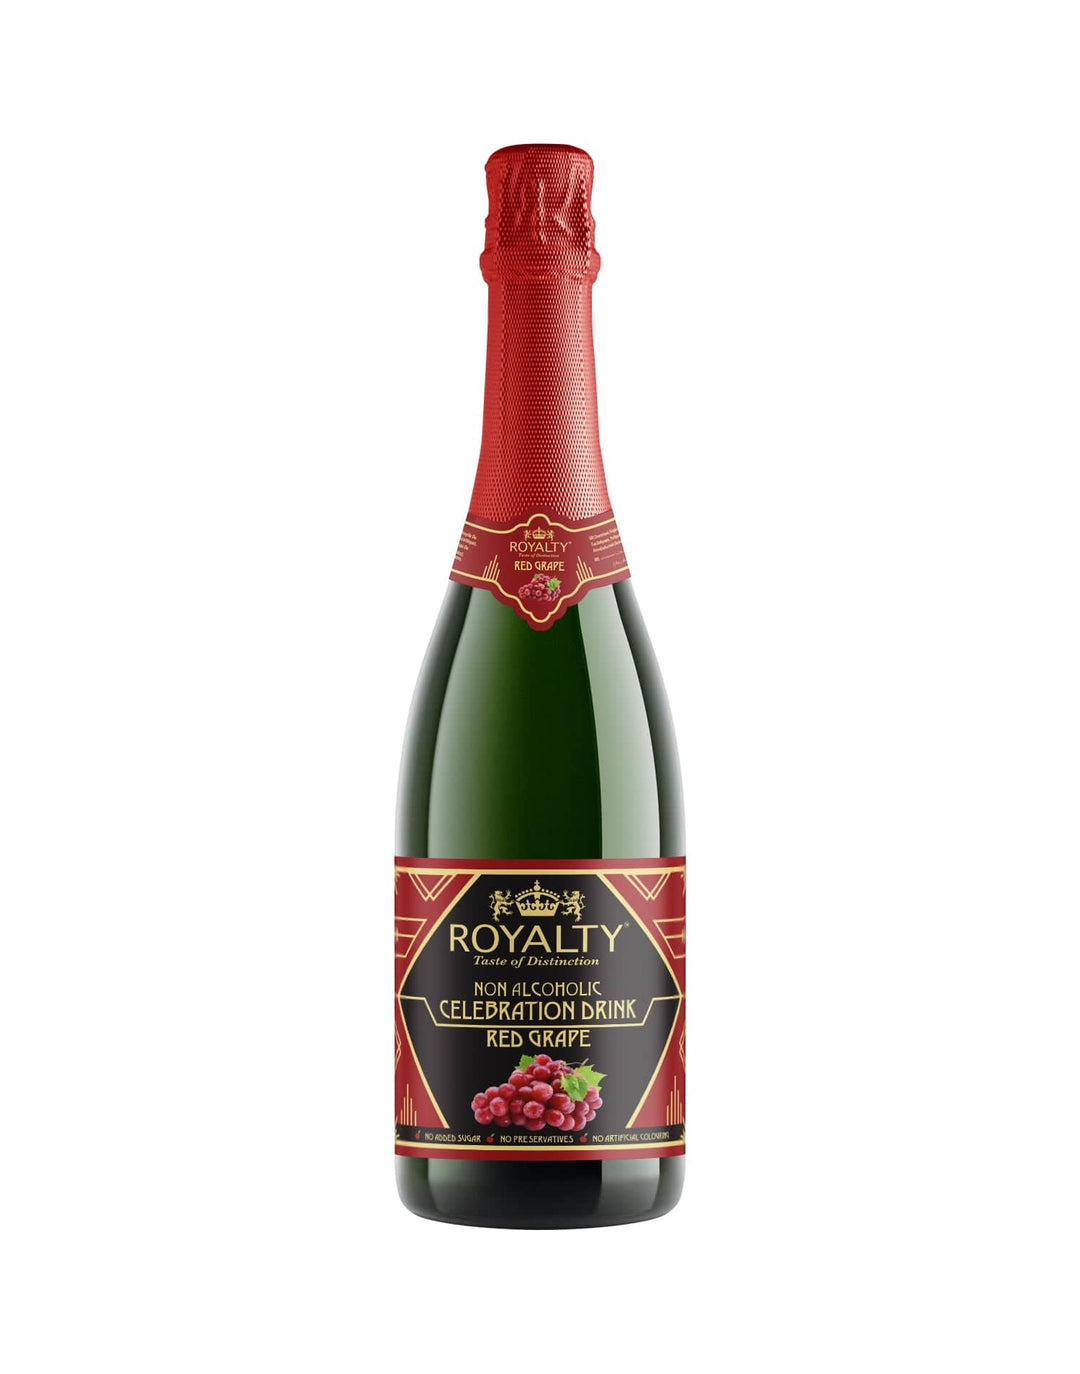 Royalty Non-Alcoholic Celebration Drink Red Grape 750ml